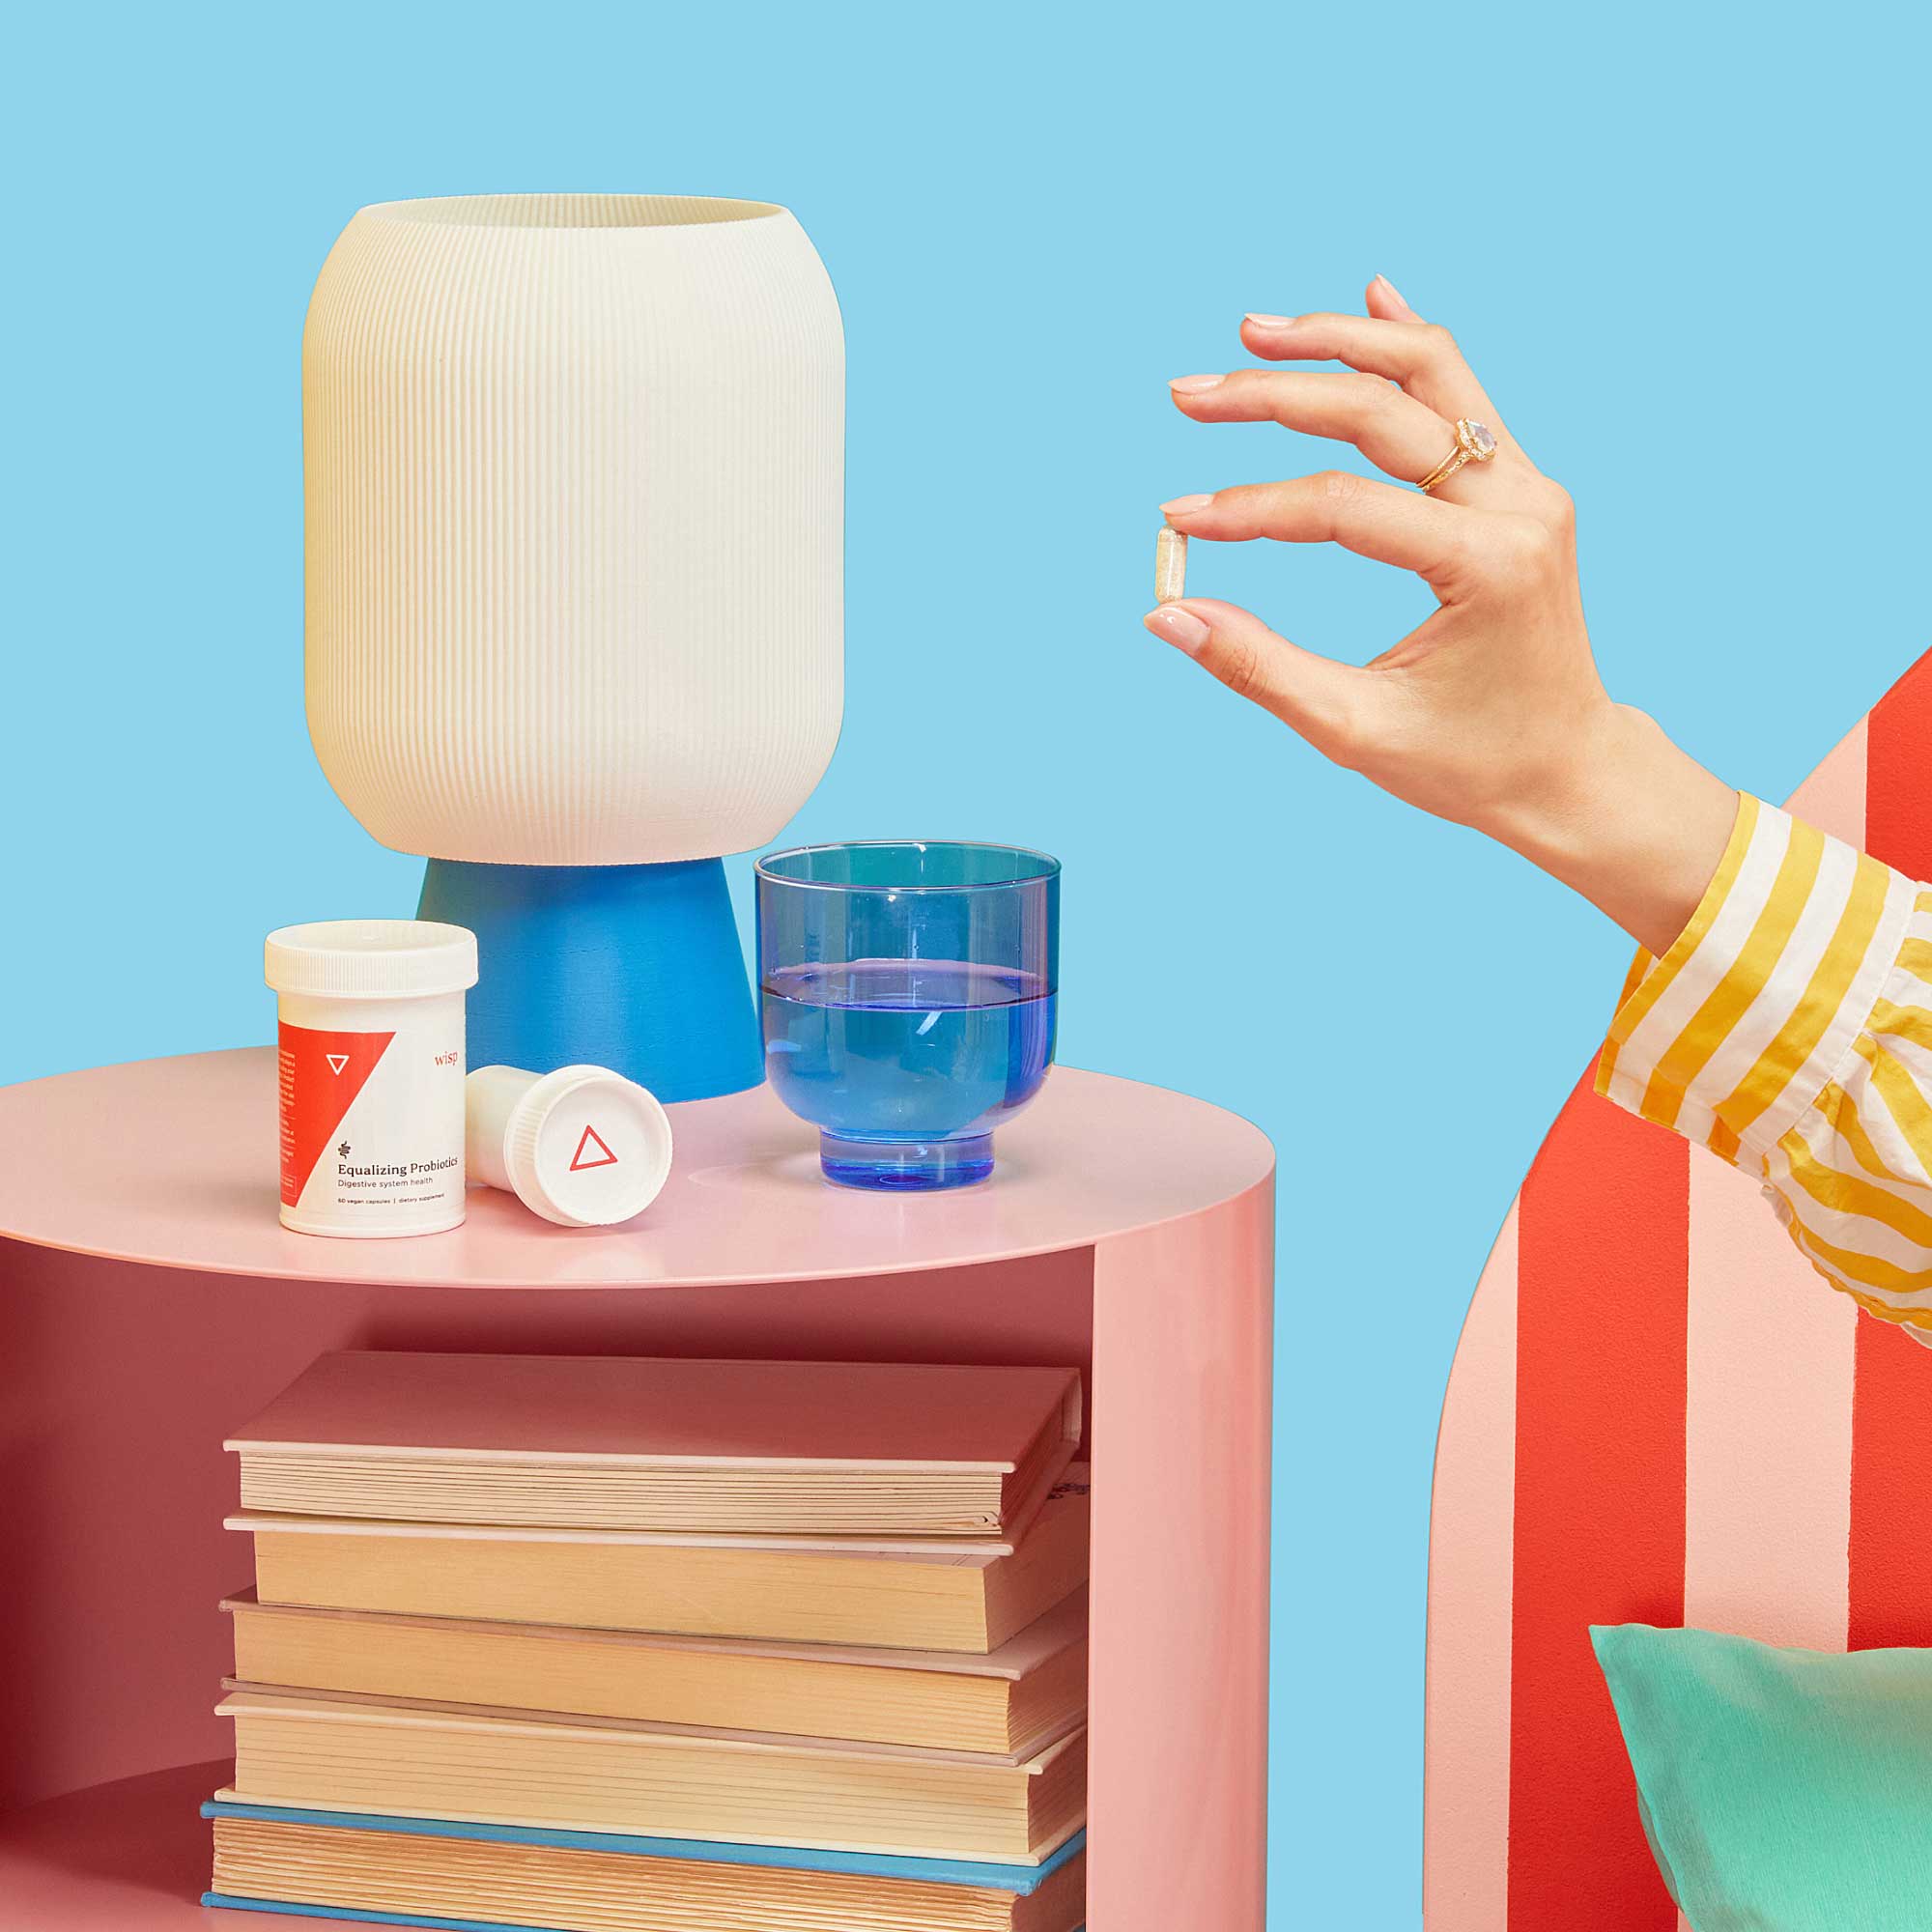 A woman's hand holding a probiotic pill near a pink nightstand with Wisp medication, a glass of water, and a lamp on top with books stacked inside in front of a light blue background